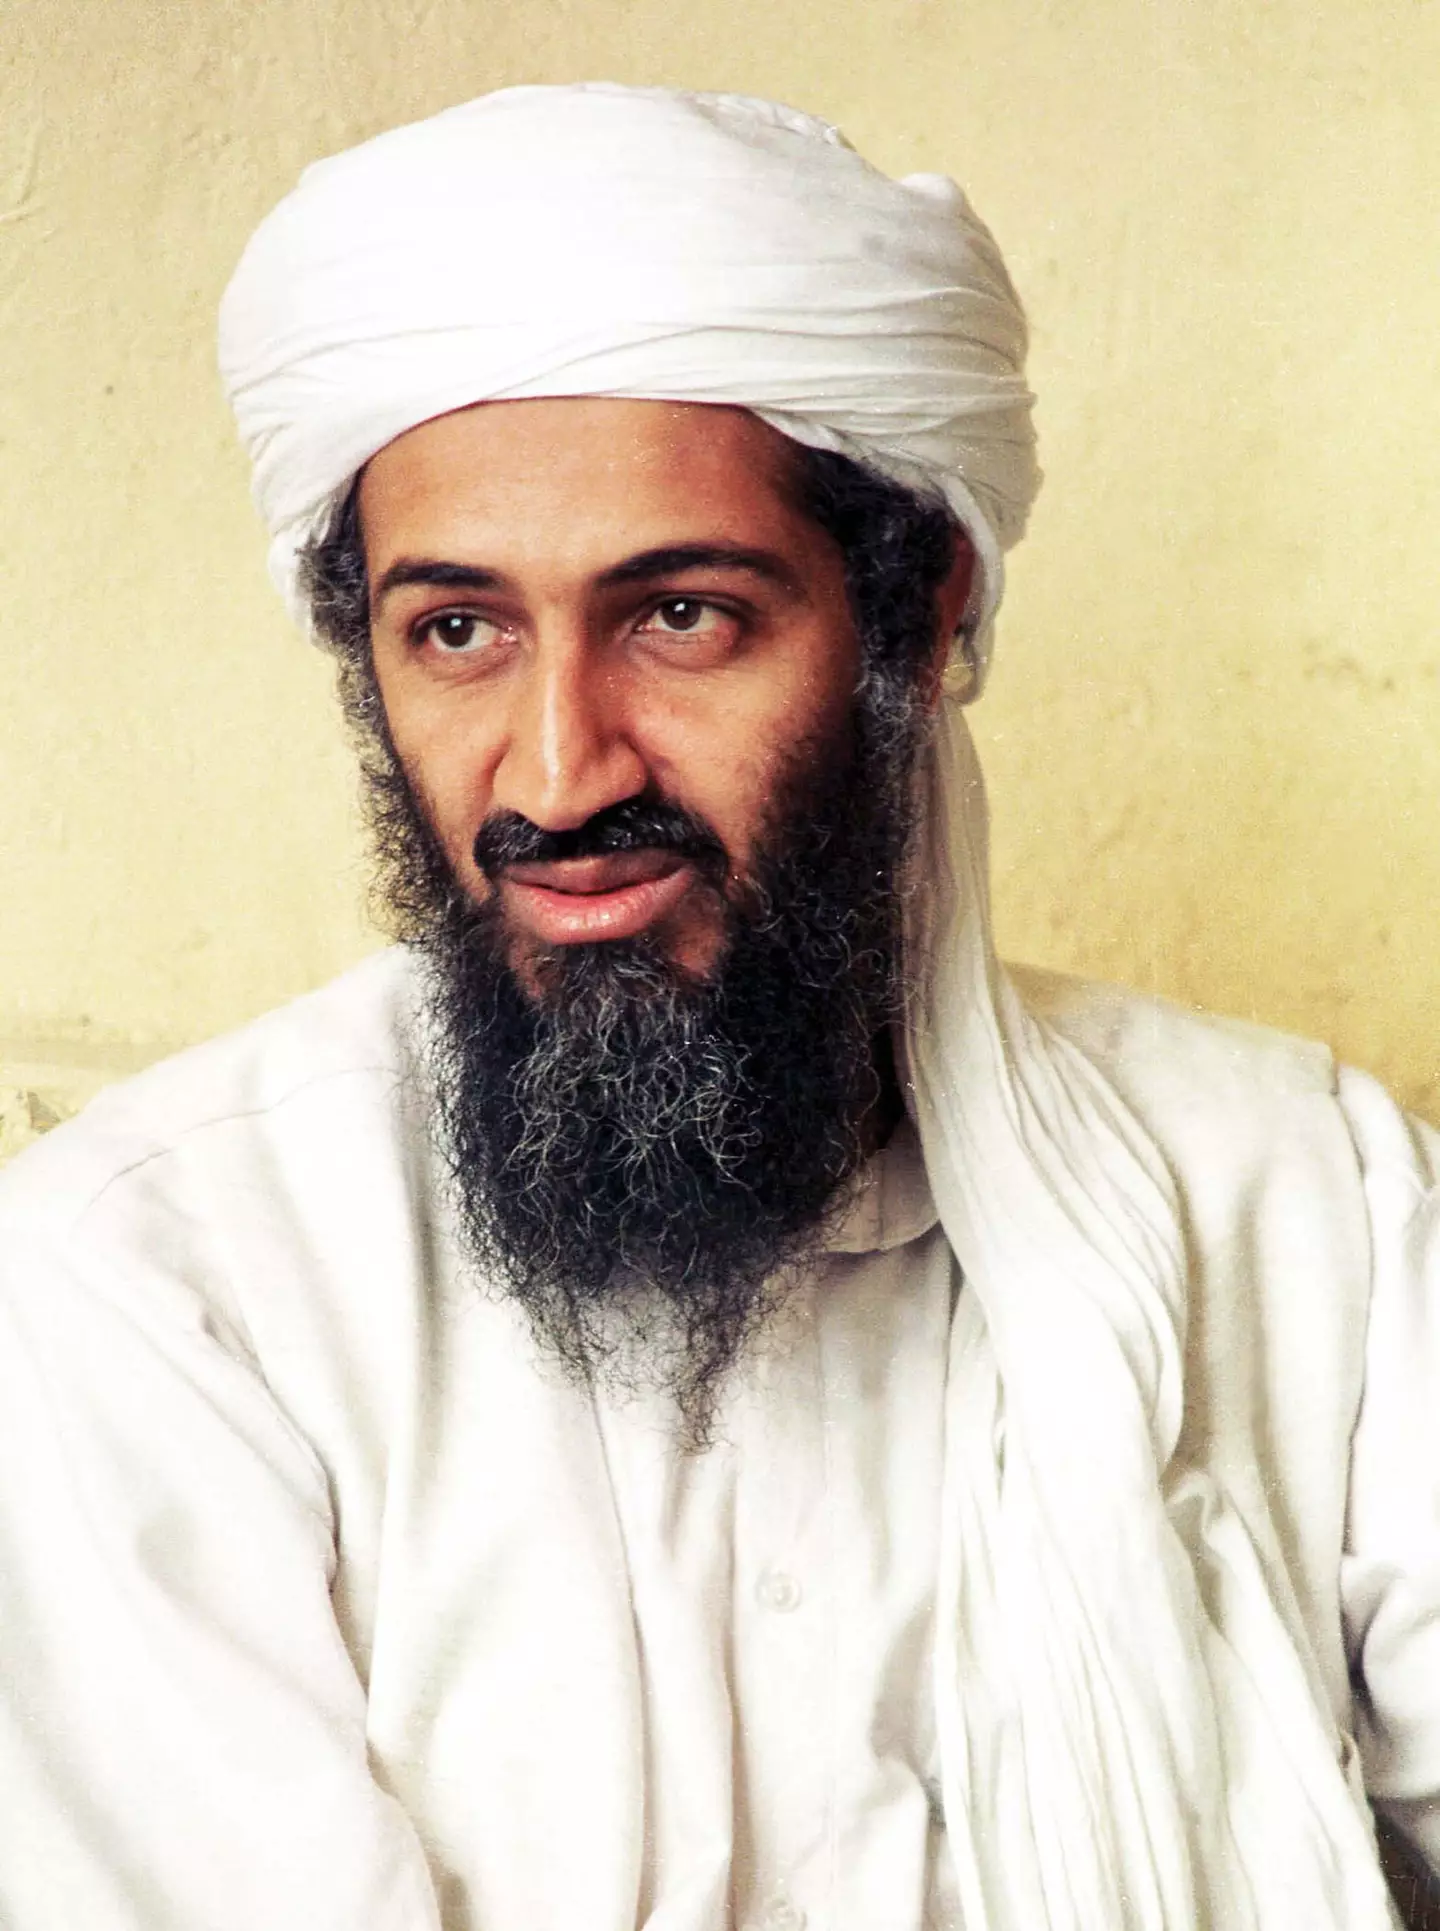 Bin Laden's body couldn't be buried on land over fears his grave would become a 'terrorist shrine'.